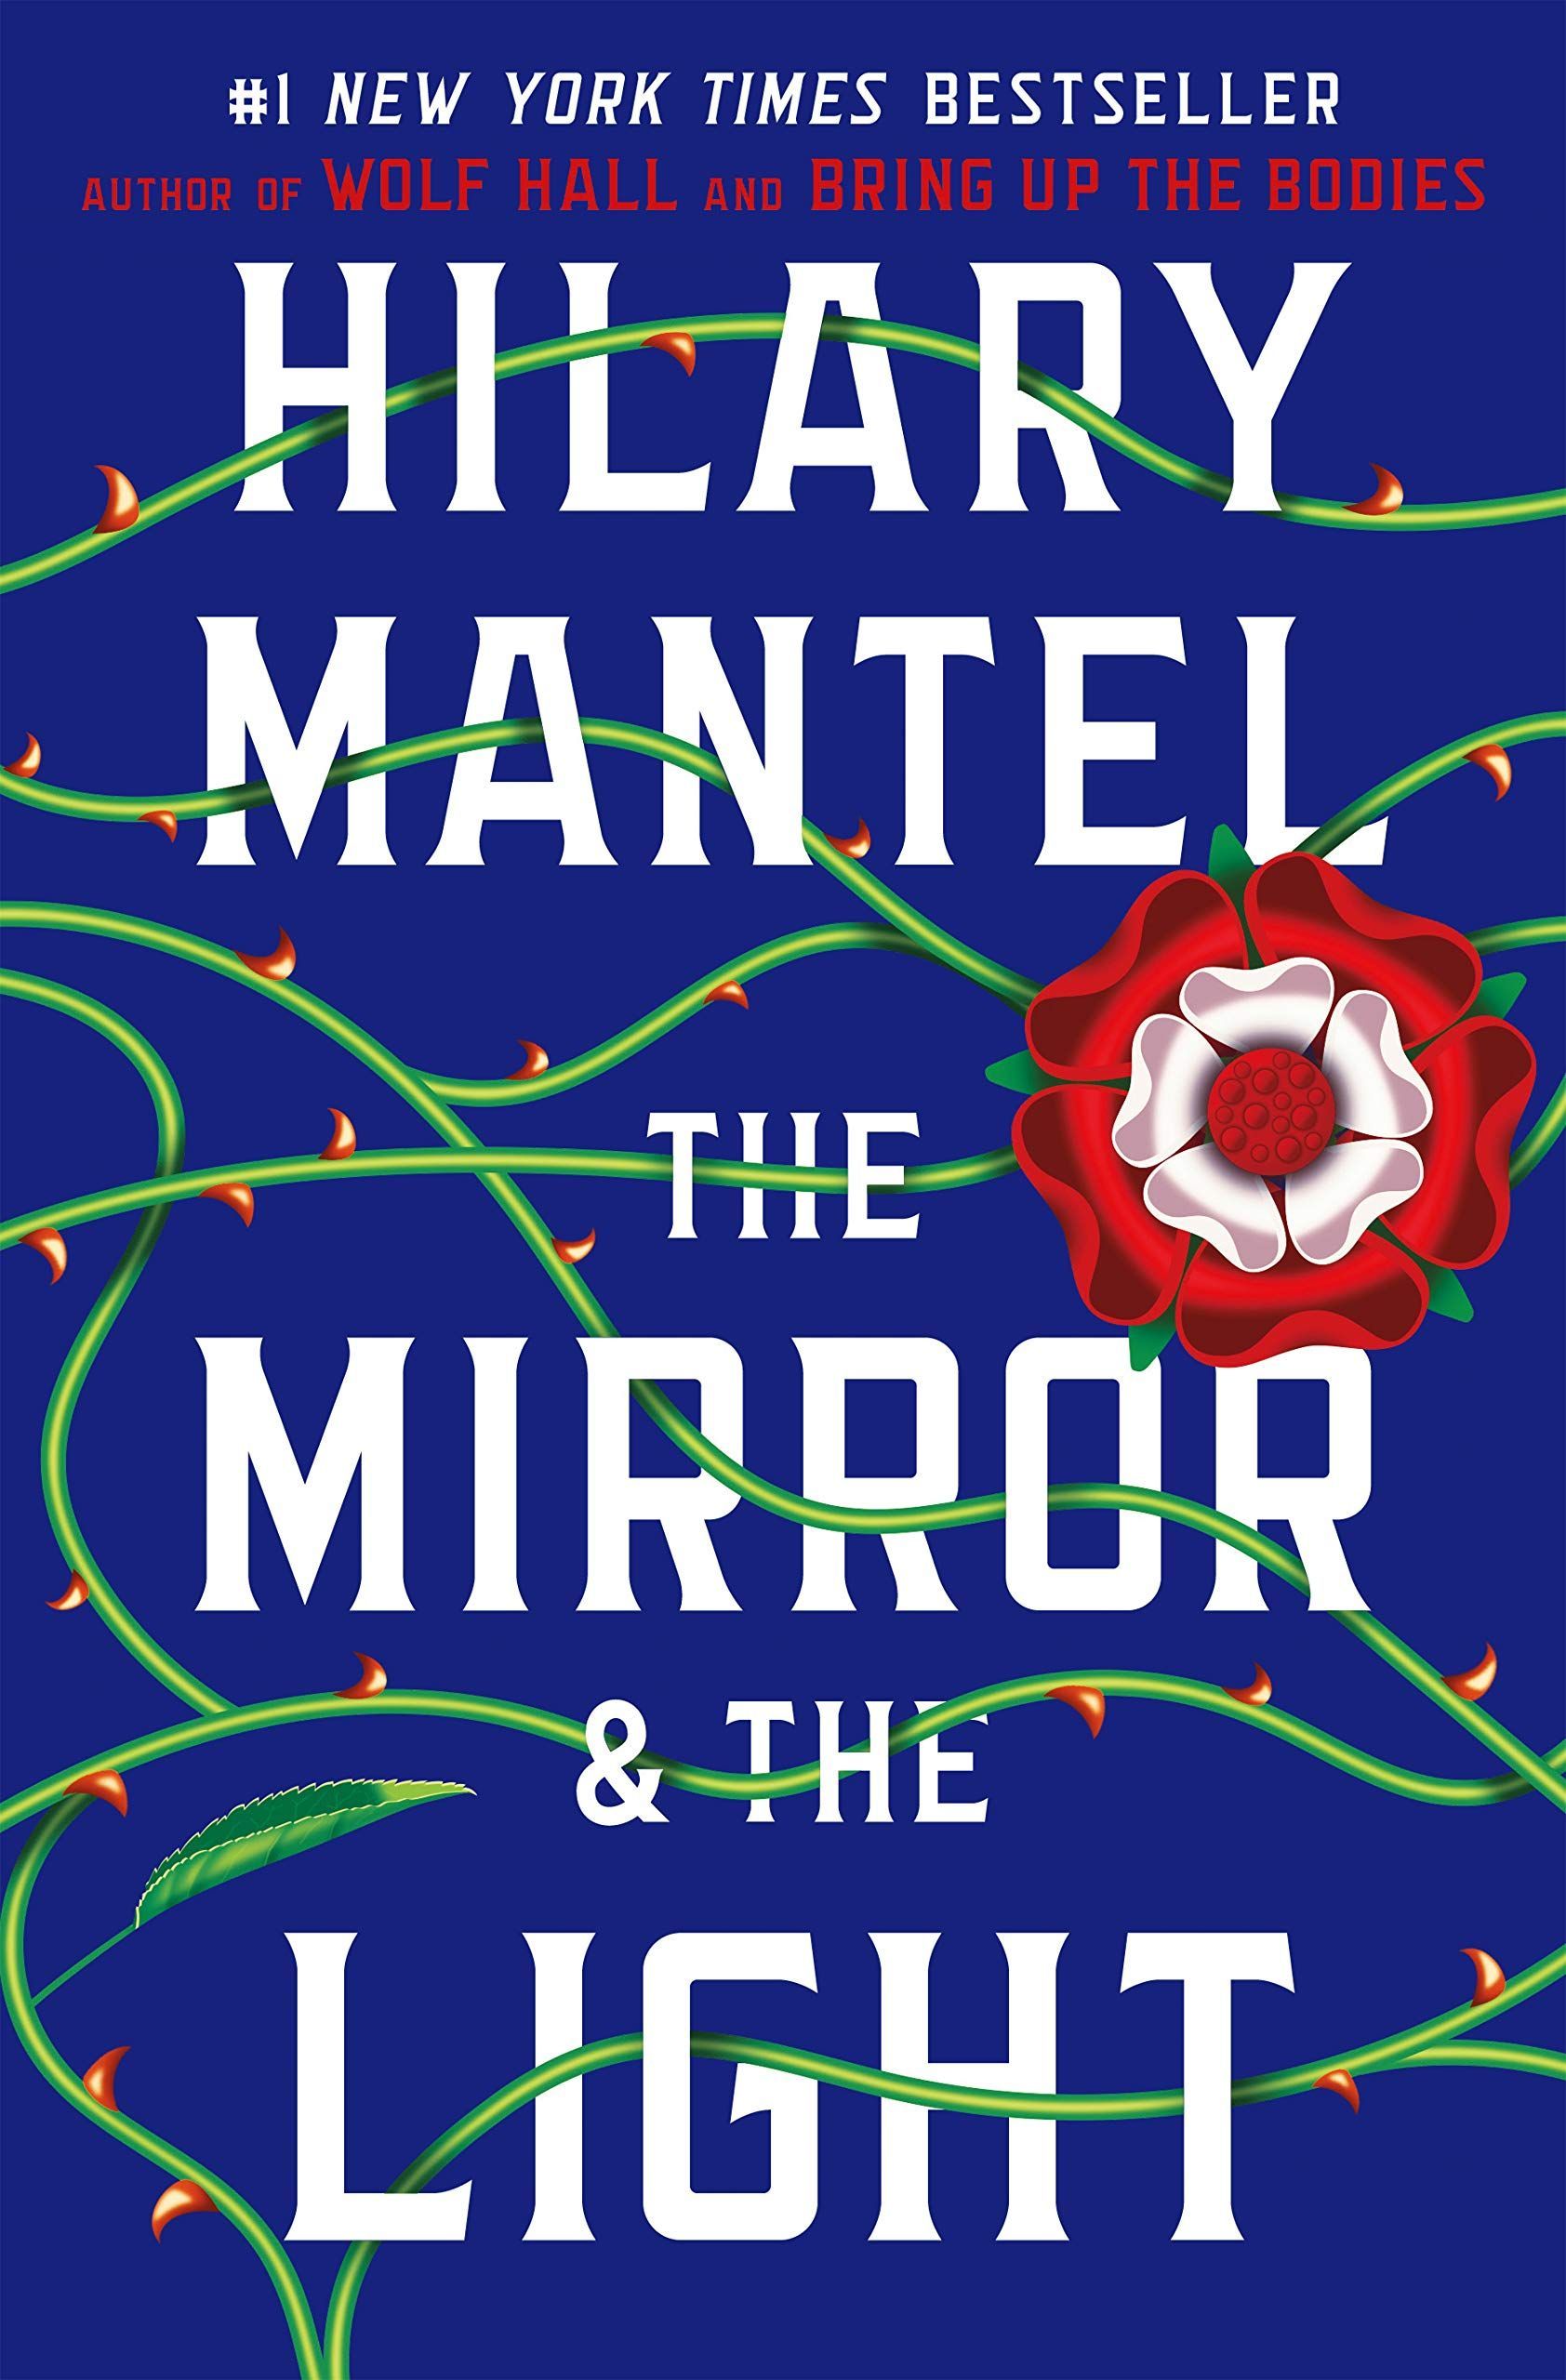 The Dead Against the Living: On Hilary Mantel’s “The Mirror & The Light”